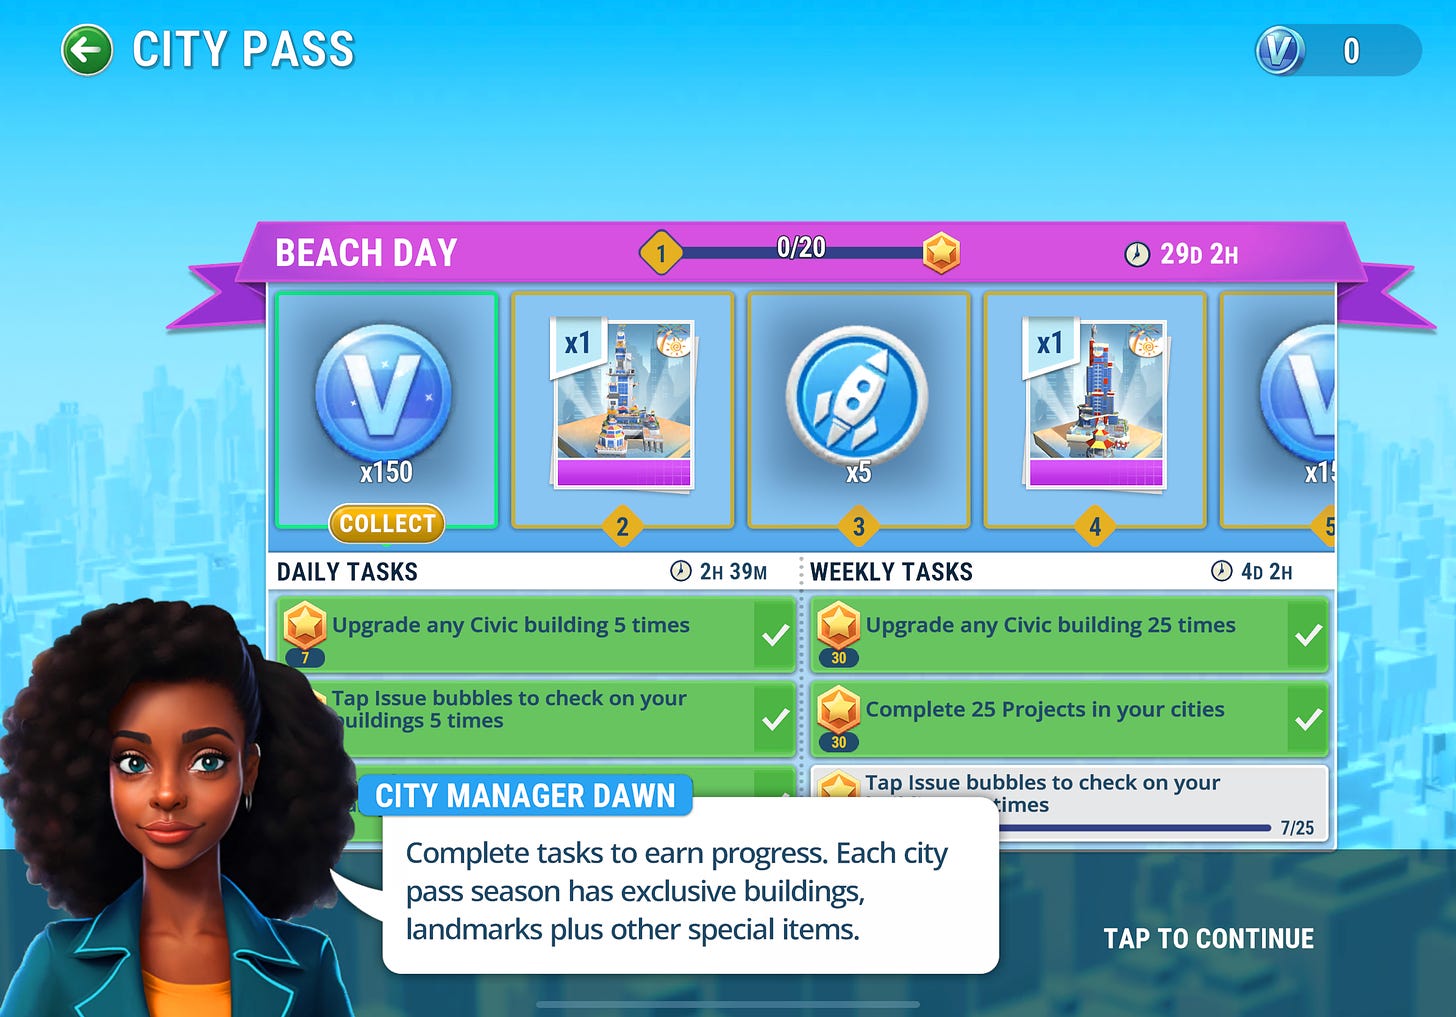 Complete tasks to earn progress. Each city pass season has exclusive buildings, landmarks plus other special items.